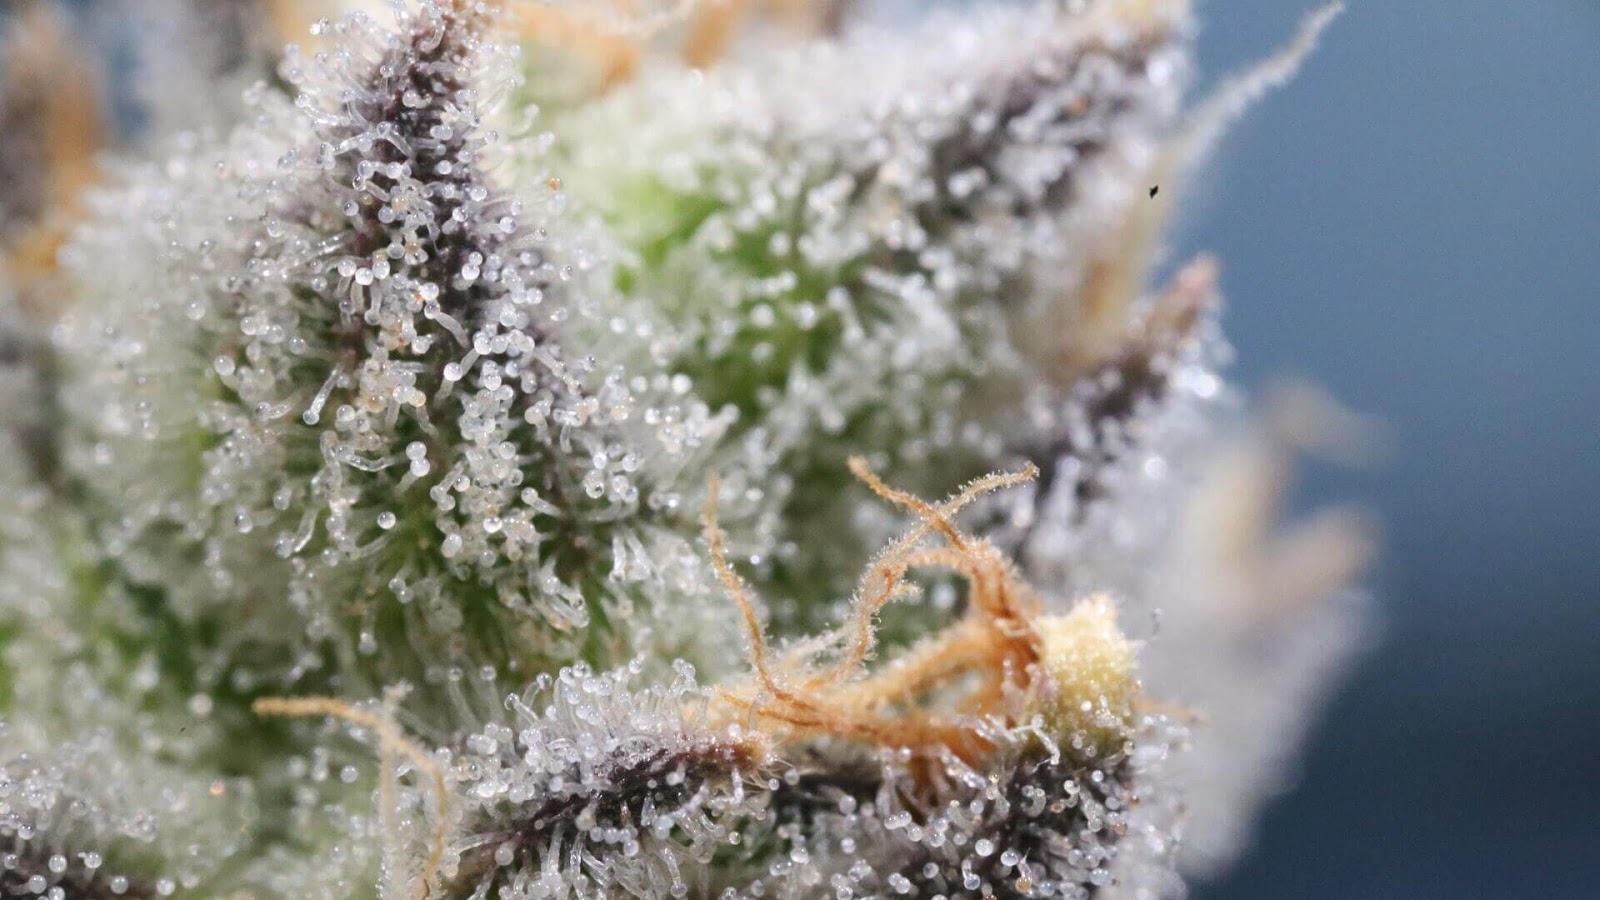 a close up photo of trichomes on a cannabis bud